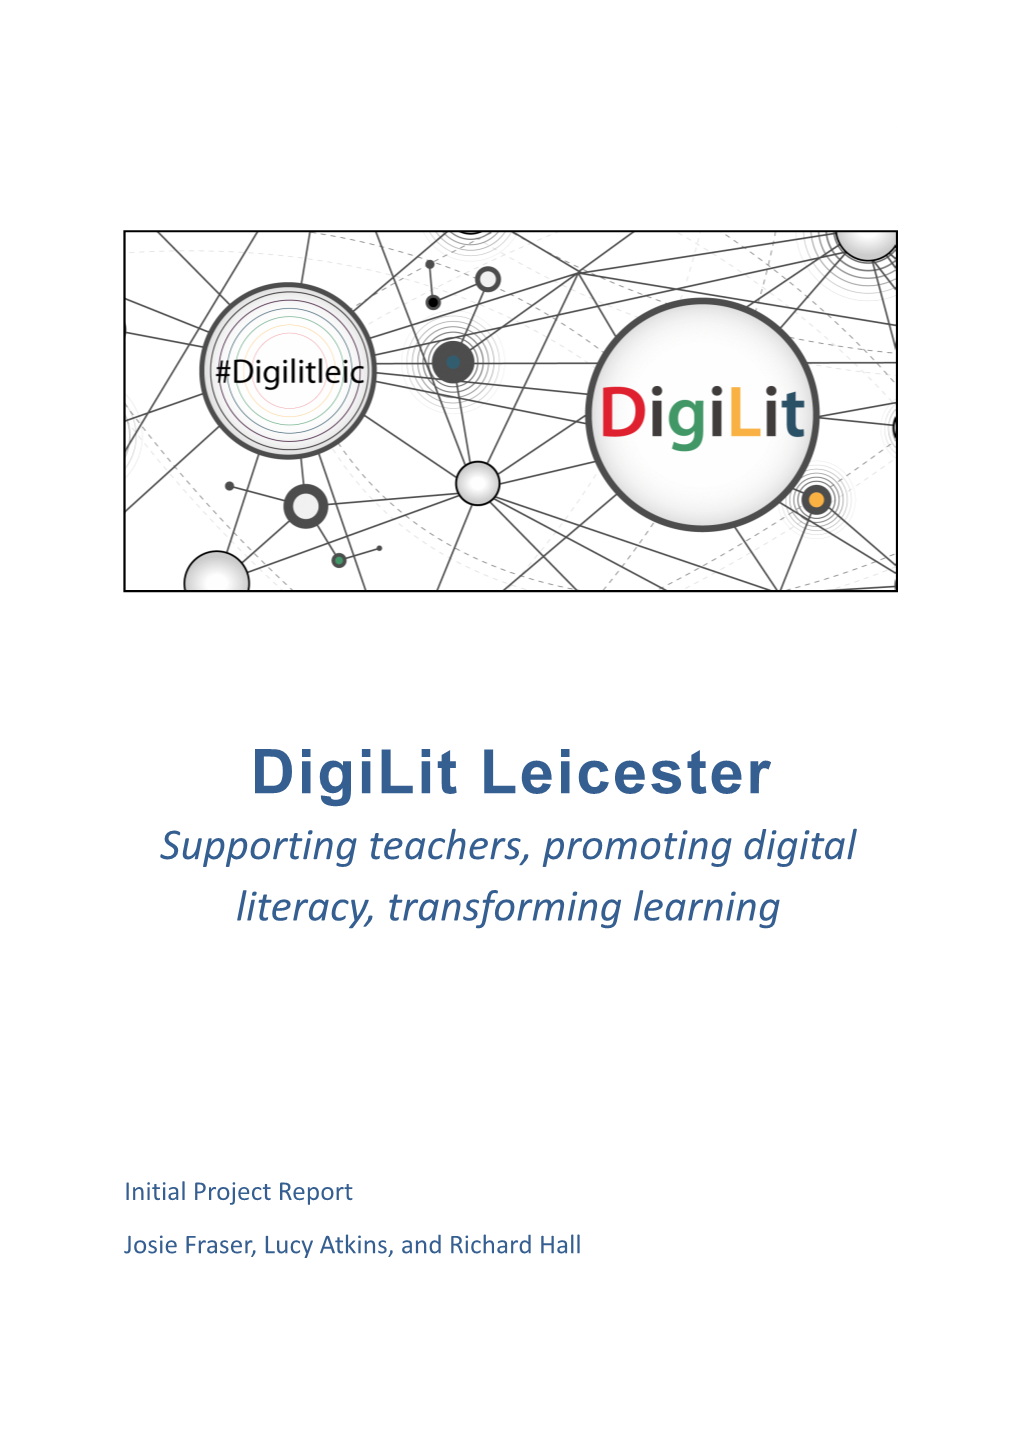 Supporting Teachers, Promoting Digital Literacy, Transforming Learning